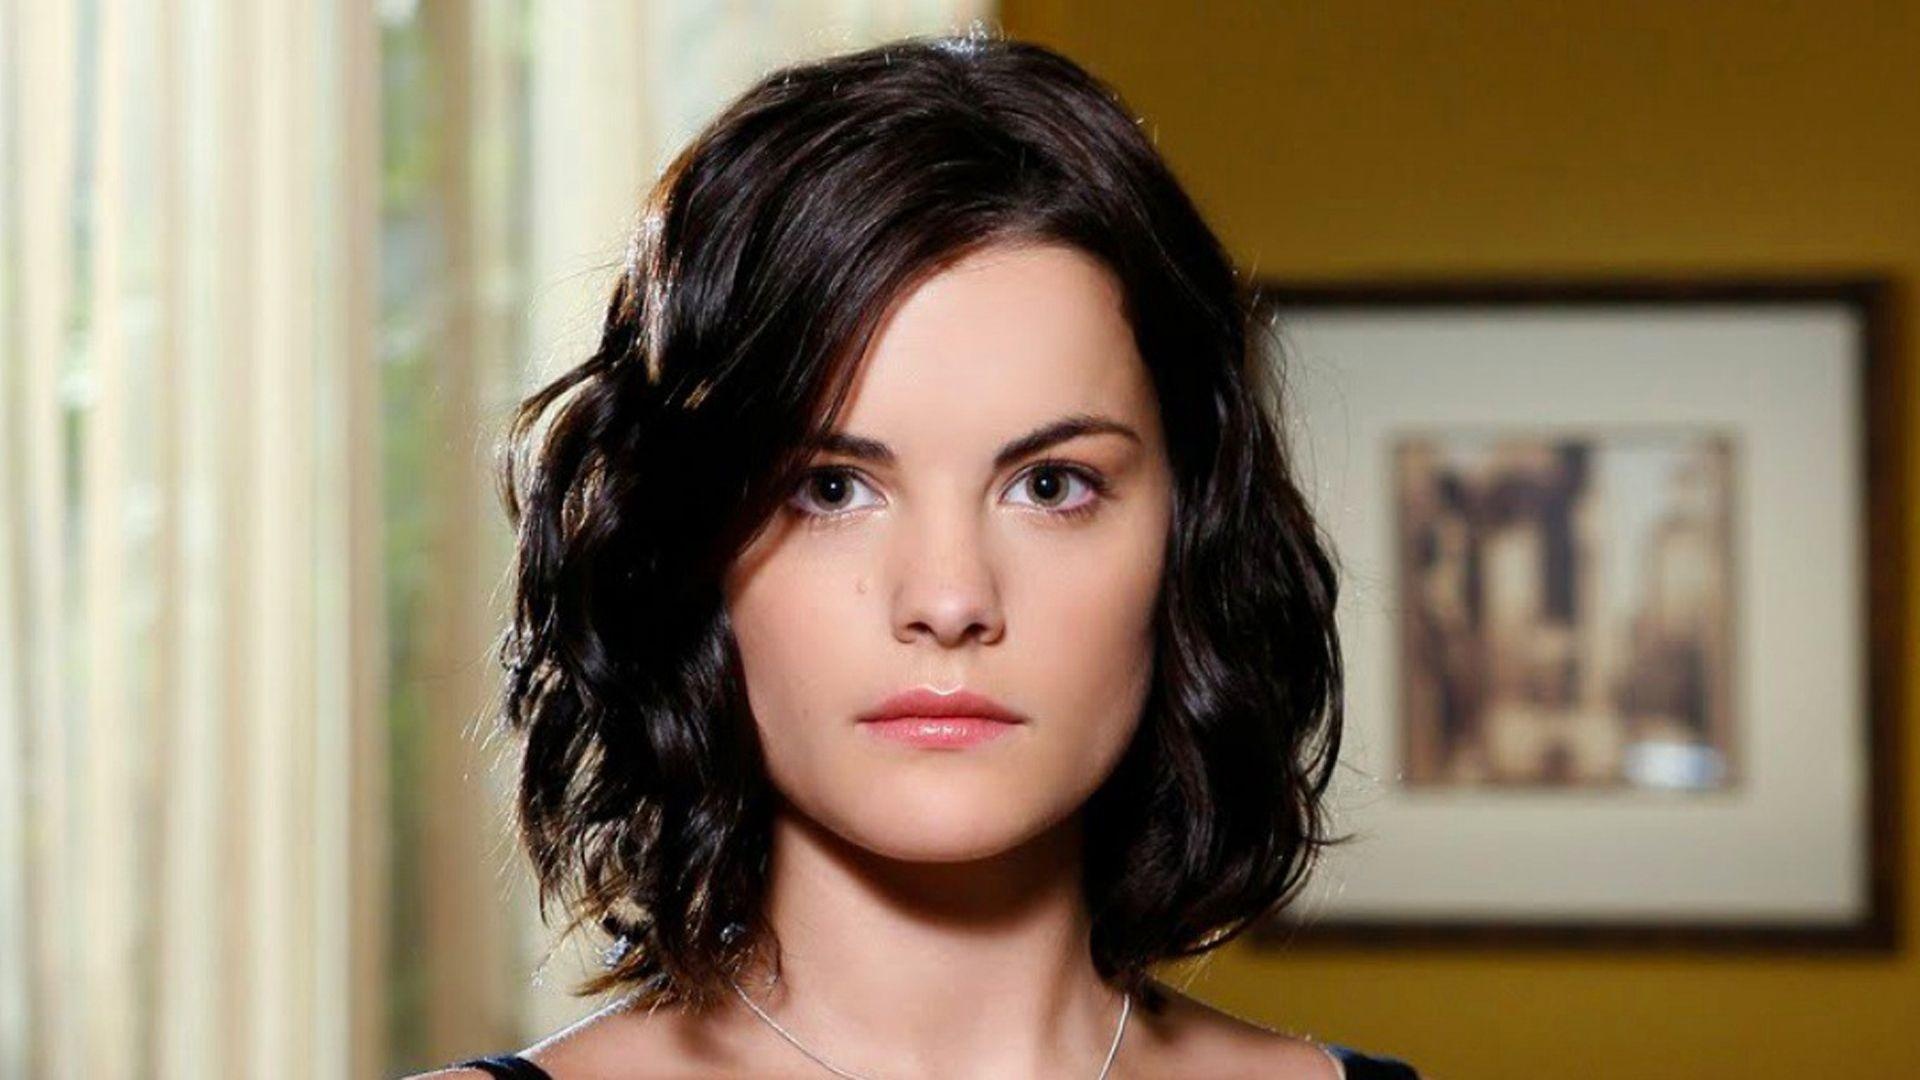 Kyle XY (TV Series): Jaimie Alexander, Nominee for Saturn Award for Best Supporting Actress on Television in 2008. 1920x1080 Full HD Wallpaper.